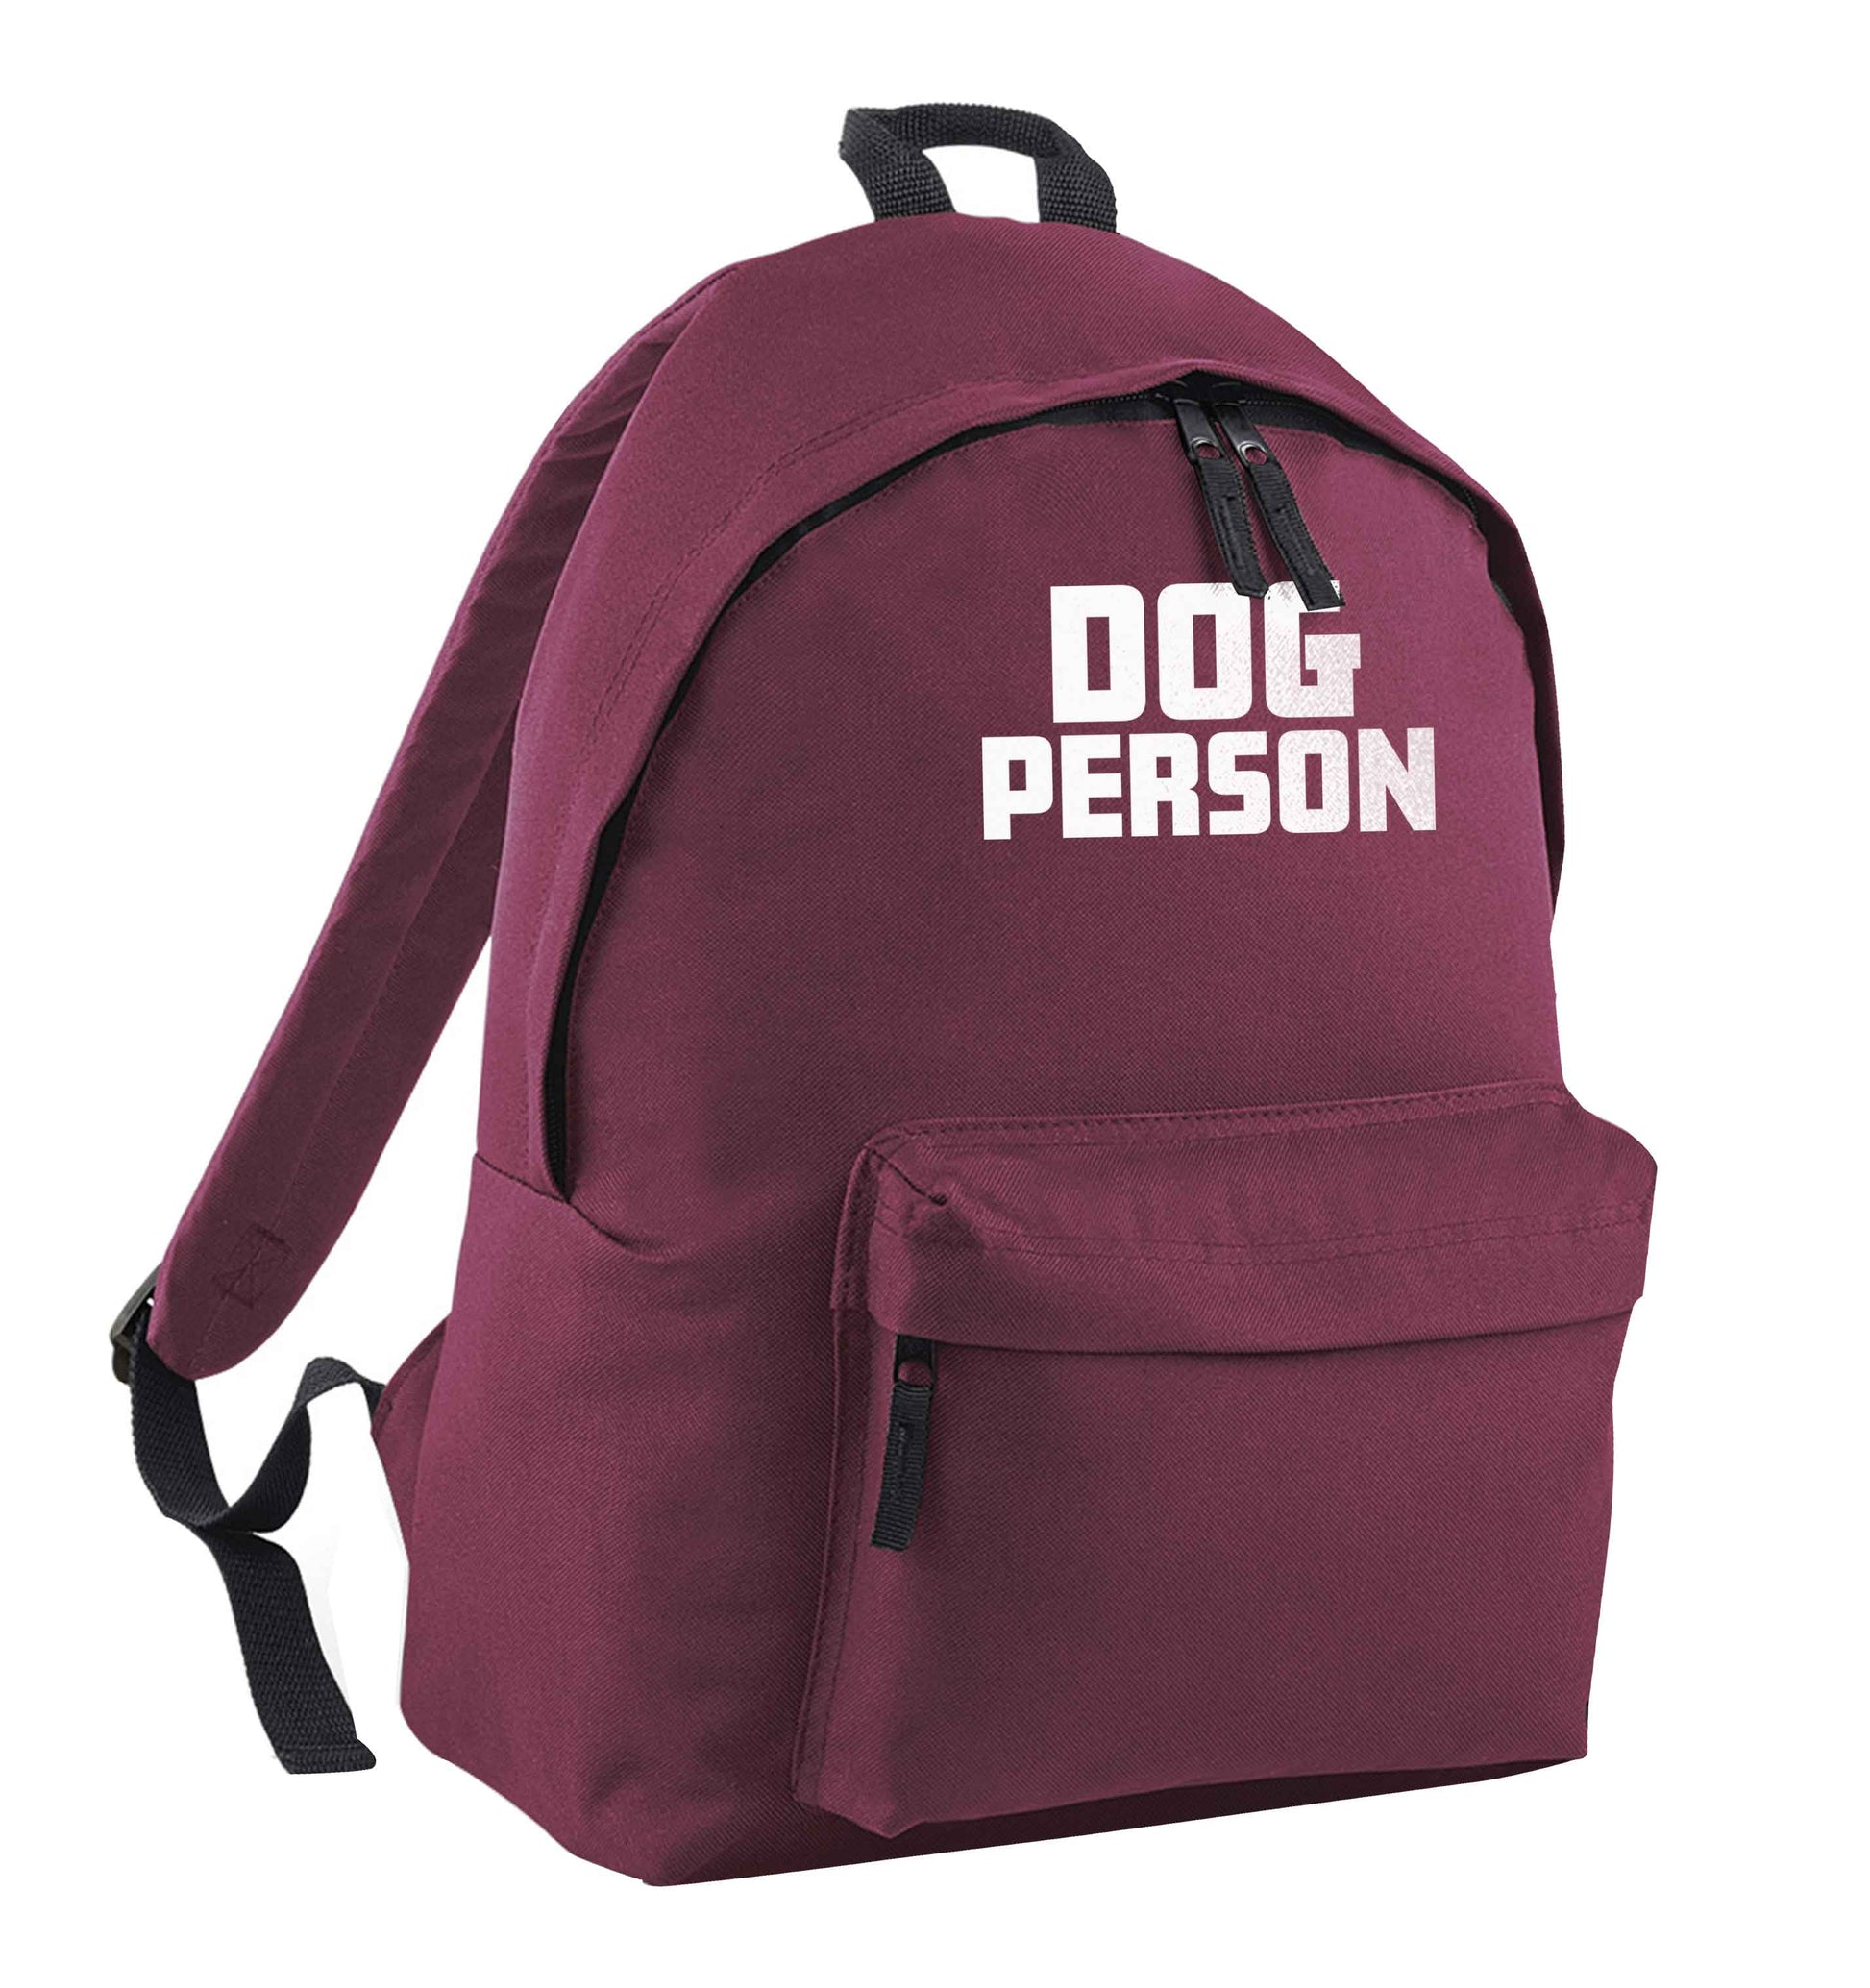 Dog Person Kit maroon children's backpack